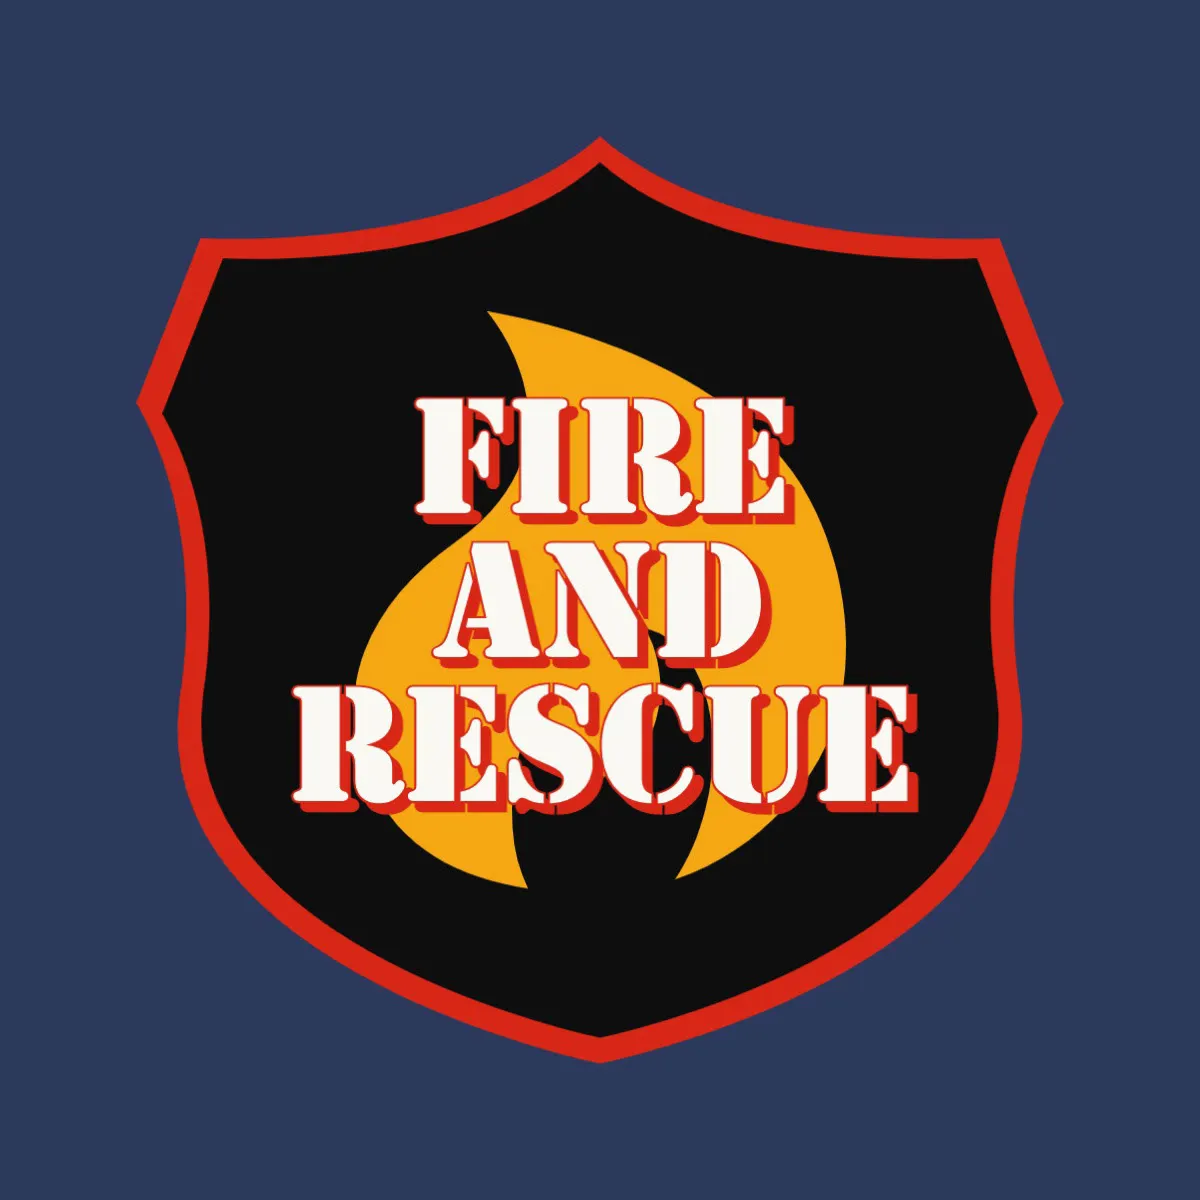 Red Orange and Black Fire and Rescue Department Logo